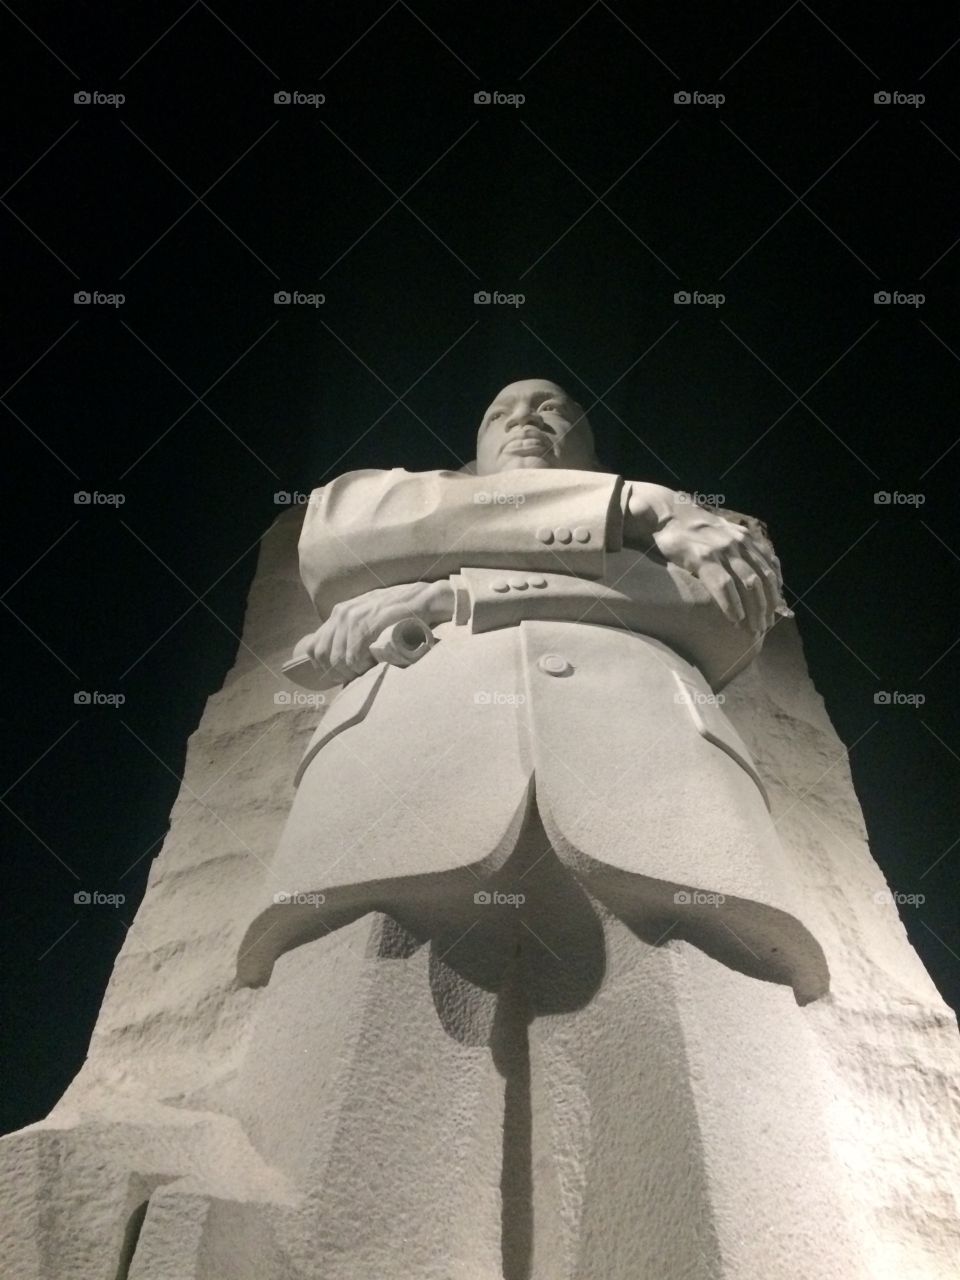 This unique perspective of the crisp cut marble of the Martin Luther King memorial offers exclusive contrast between the glowing stone and the starless sky of late May.